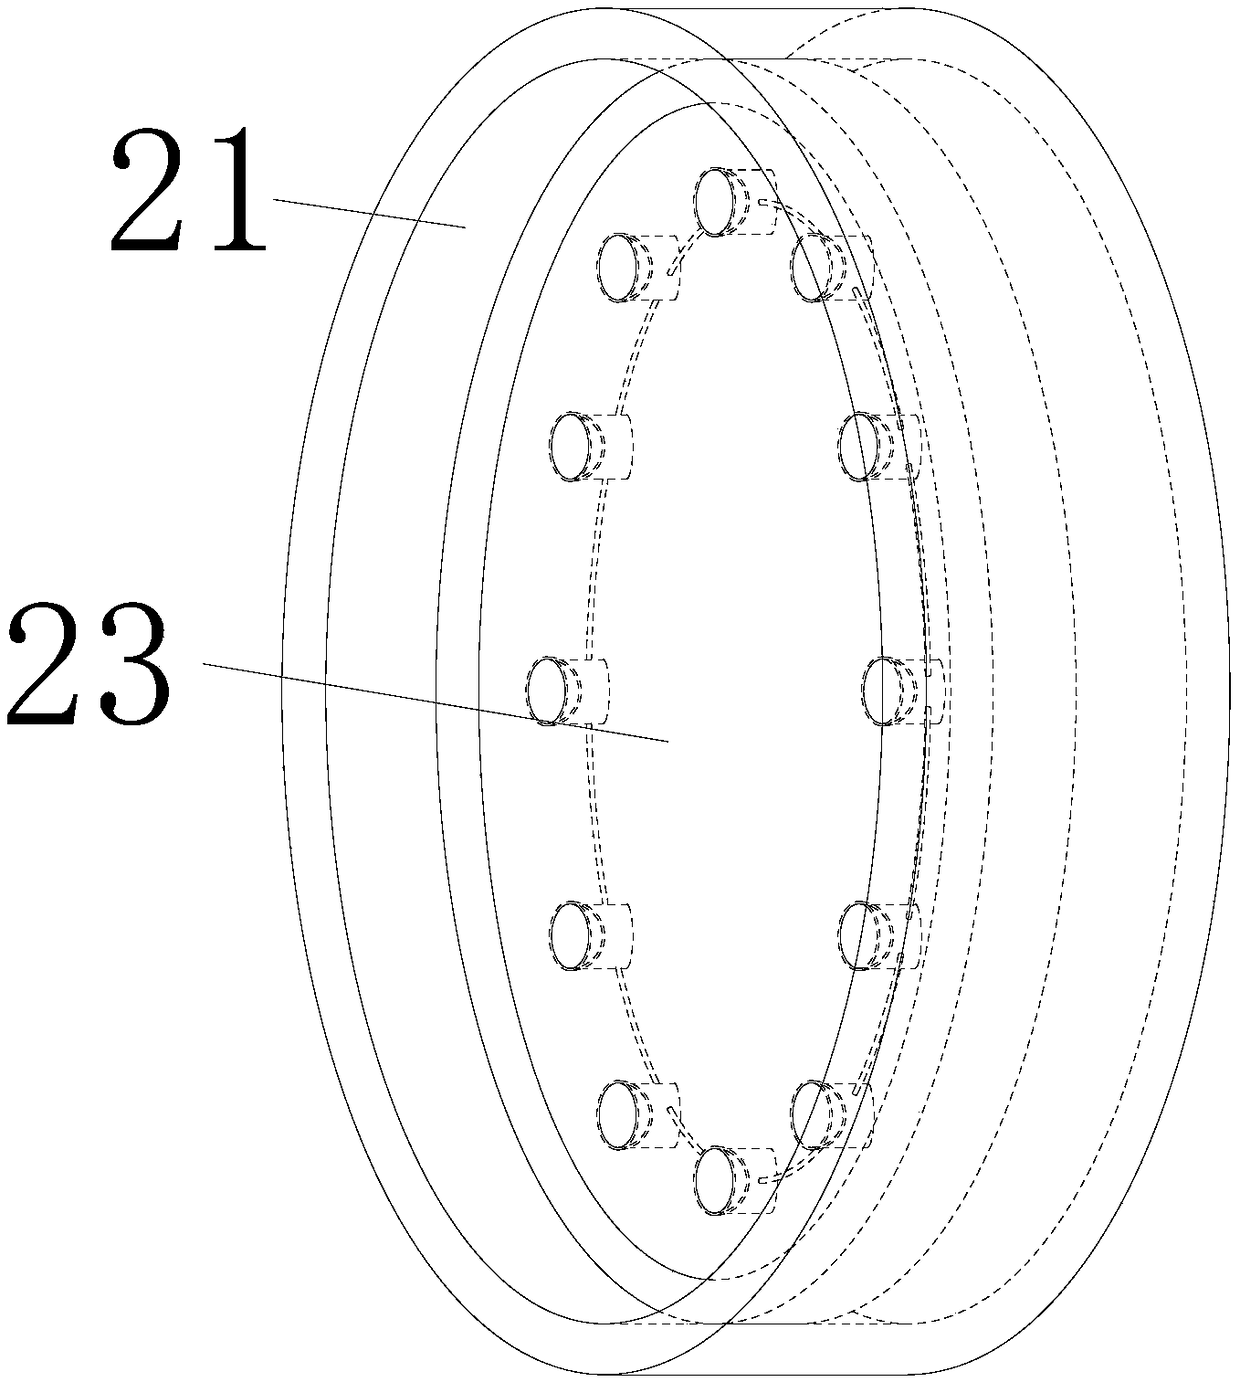 Air suction-type seed-metering device capable of preventing seed blockage at seed-sucking holes